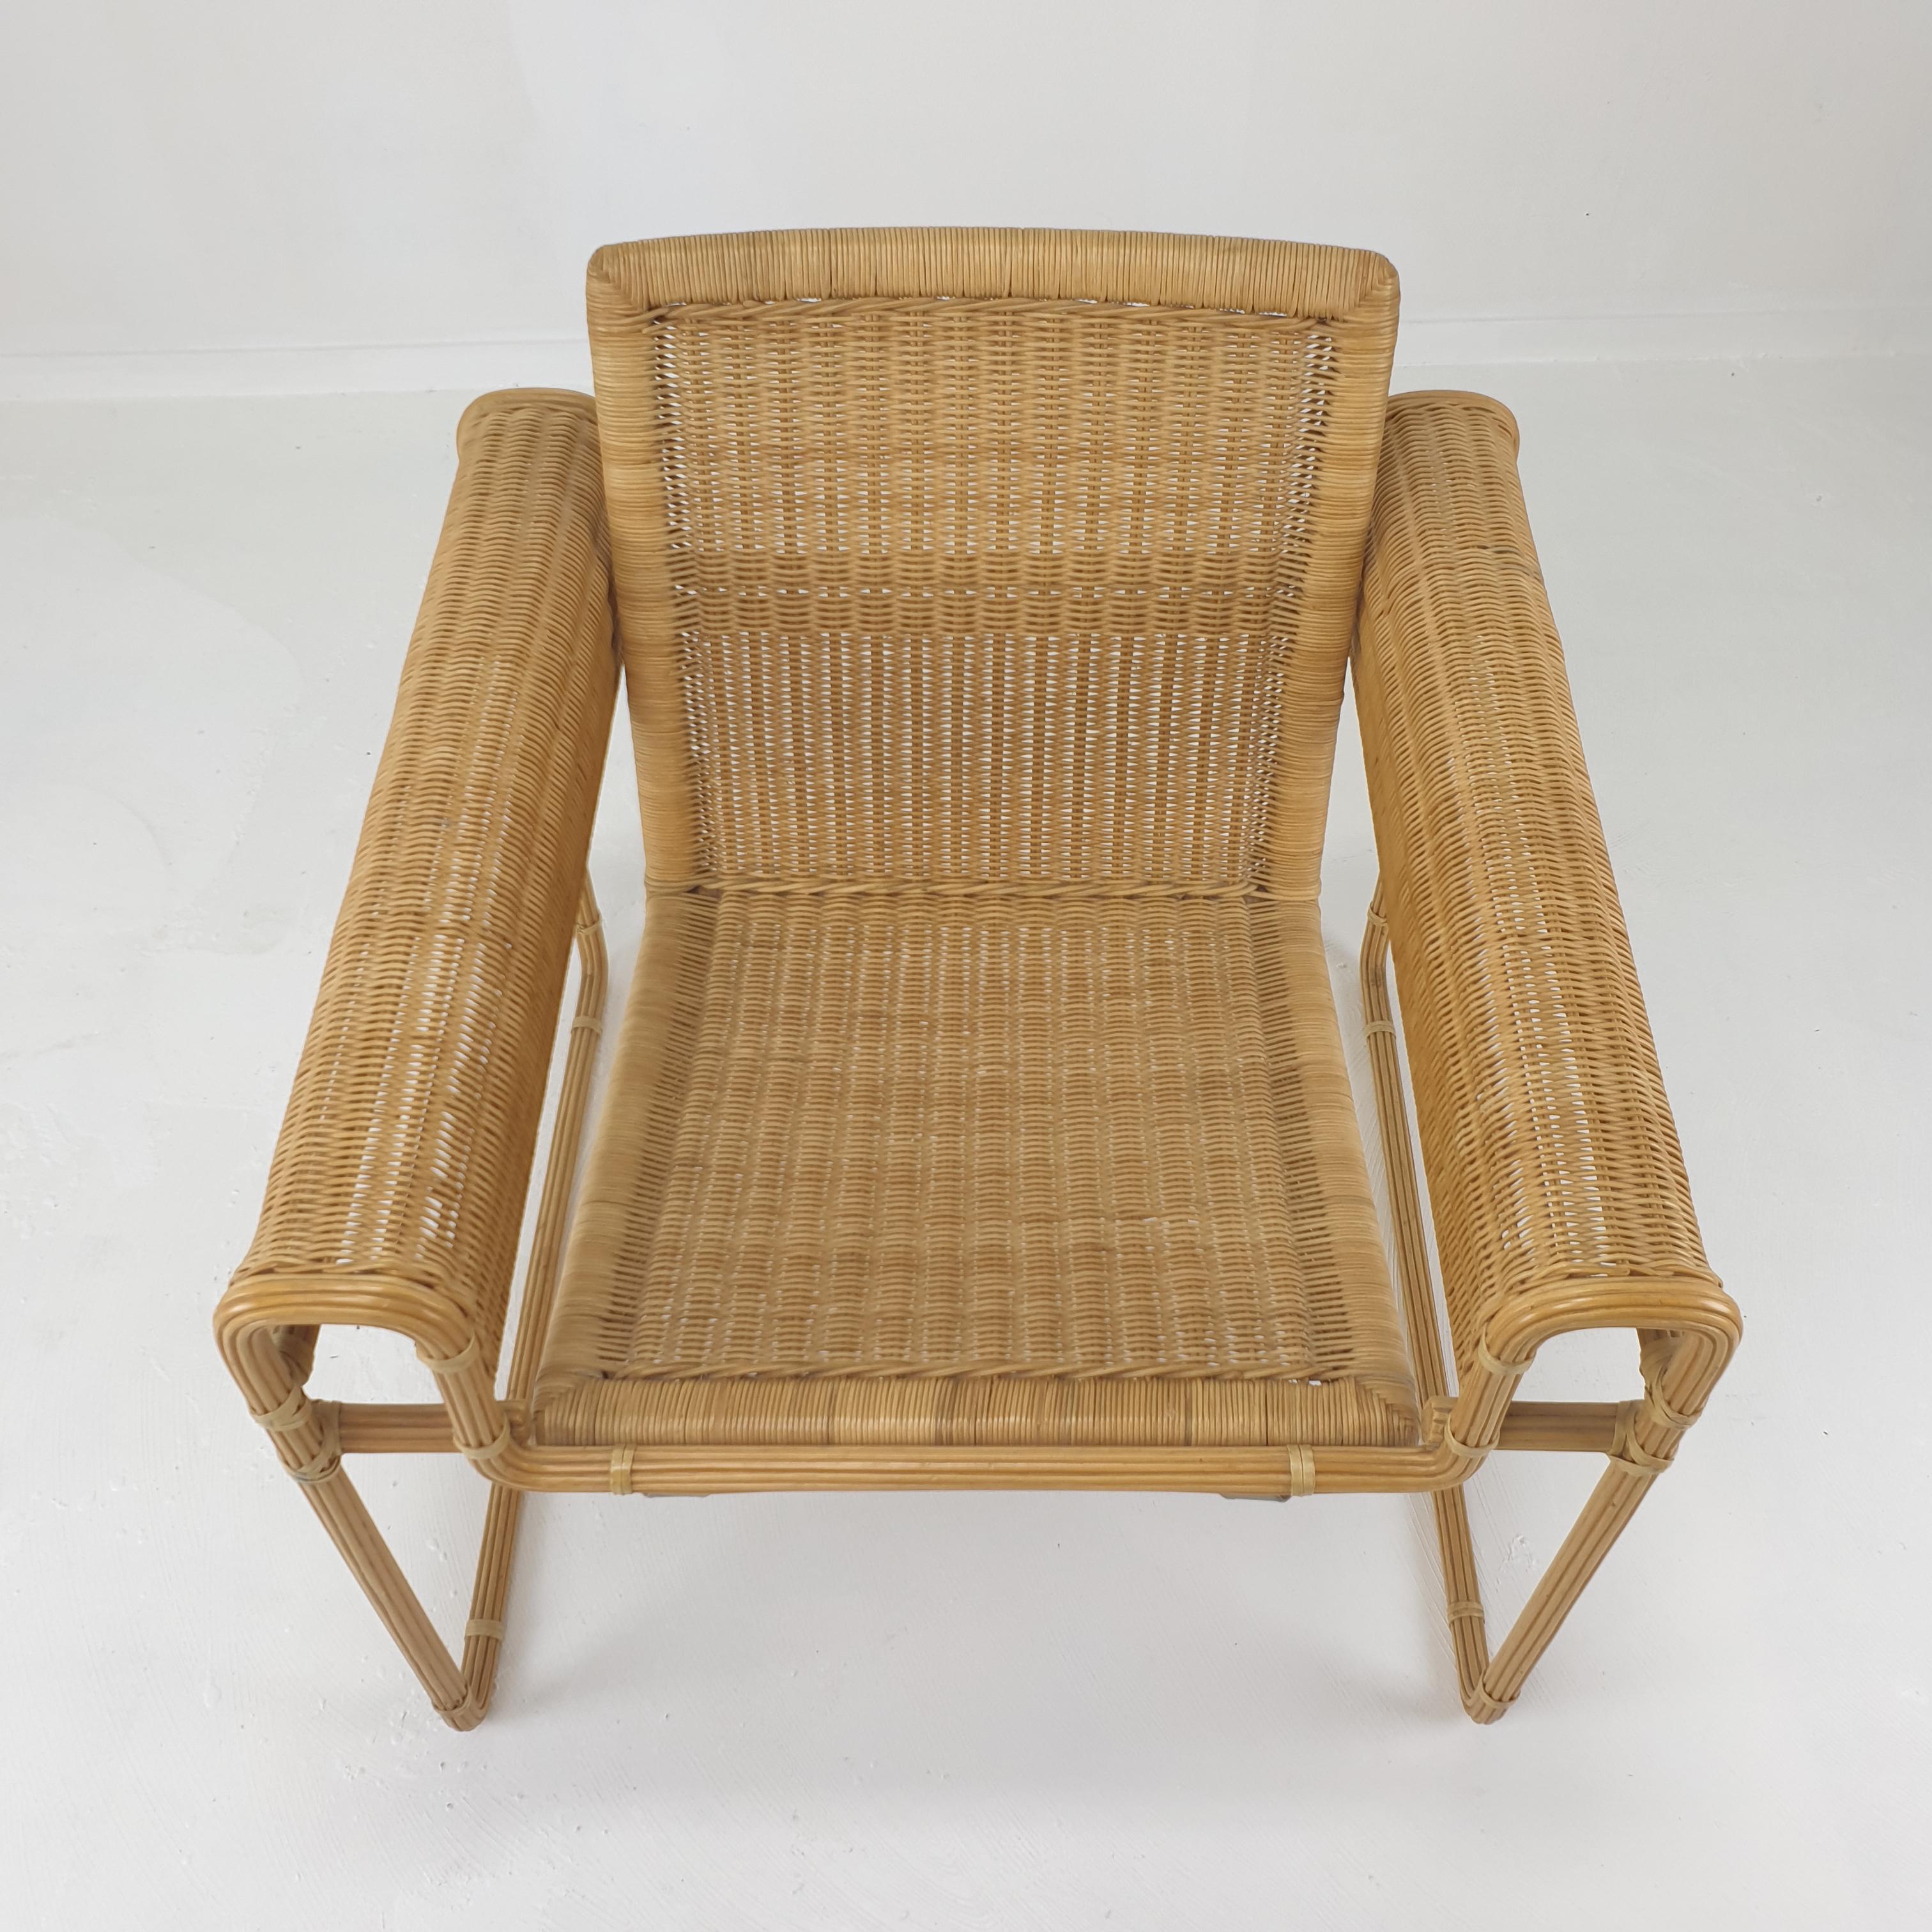 Set of 2 Dutch Wicker Chairs, 1970's For Sale 12